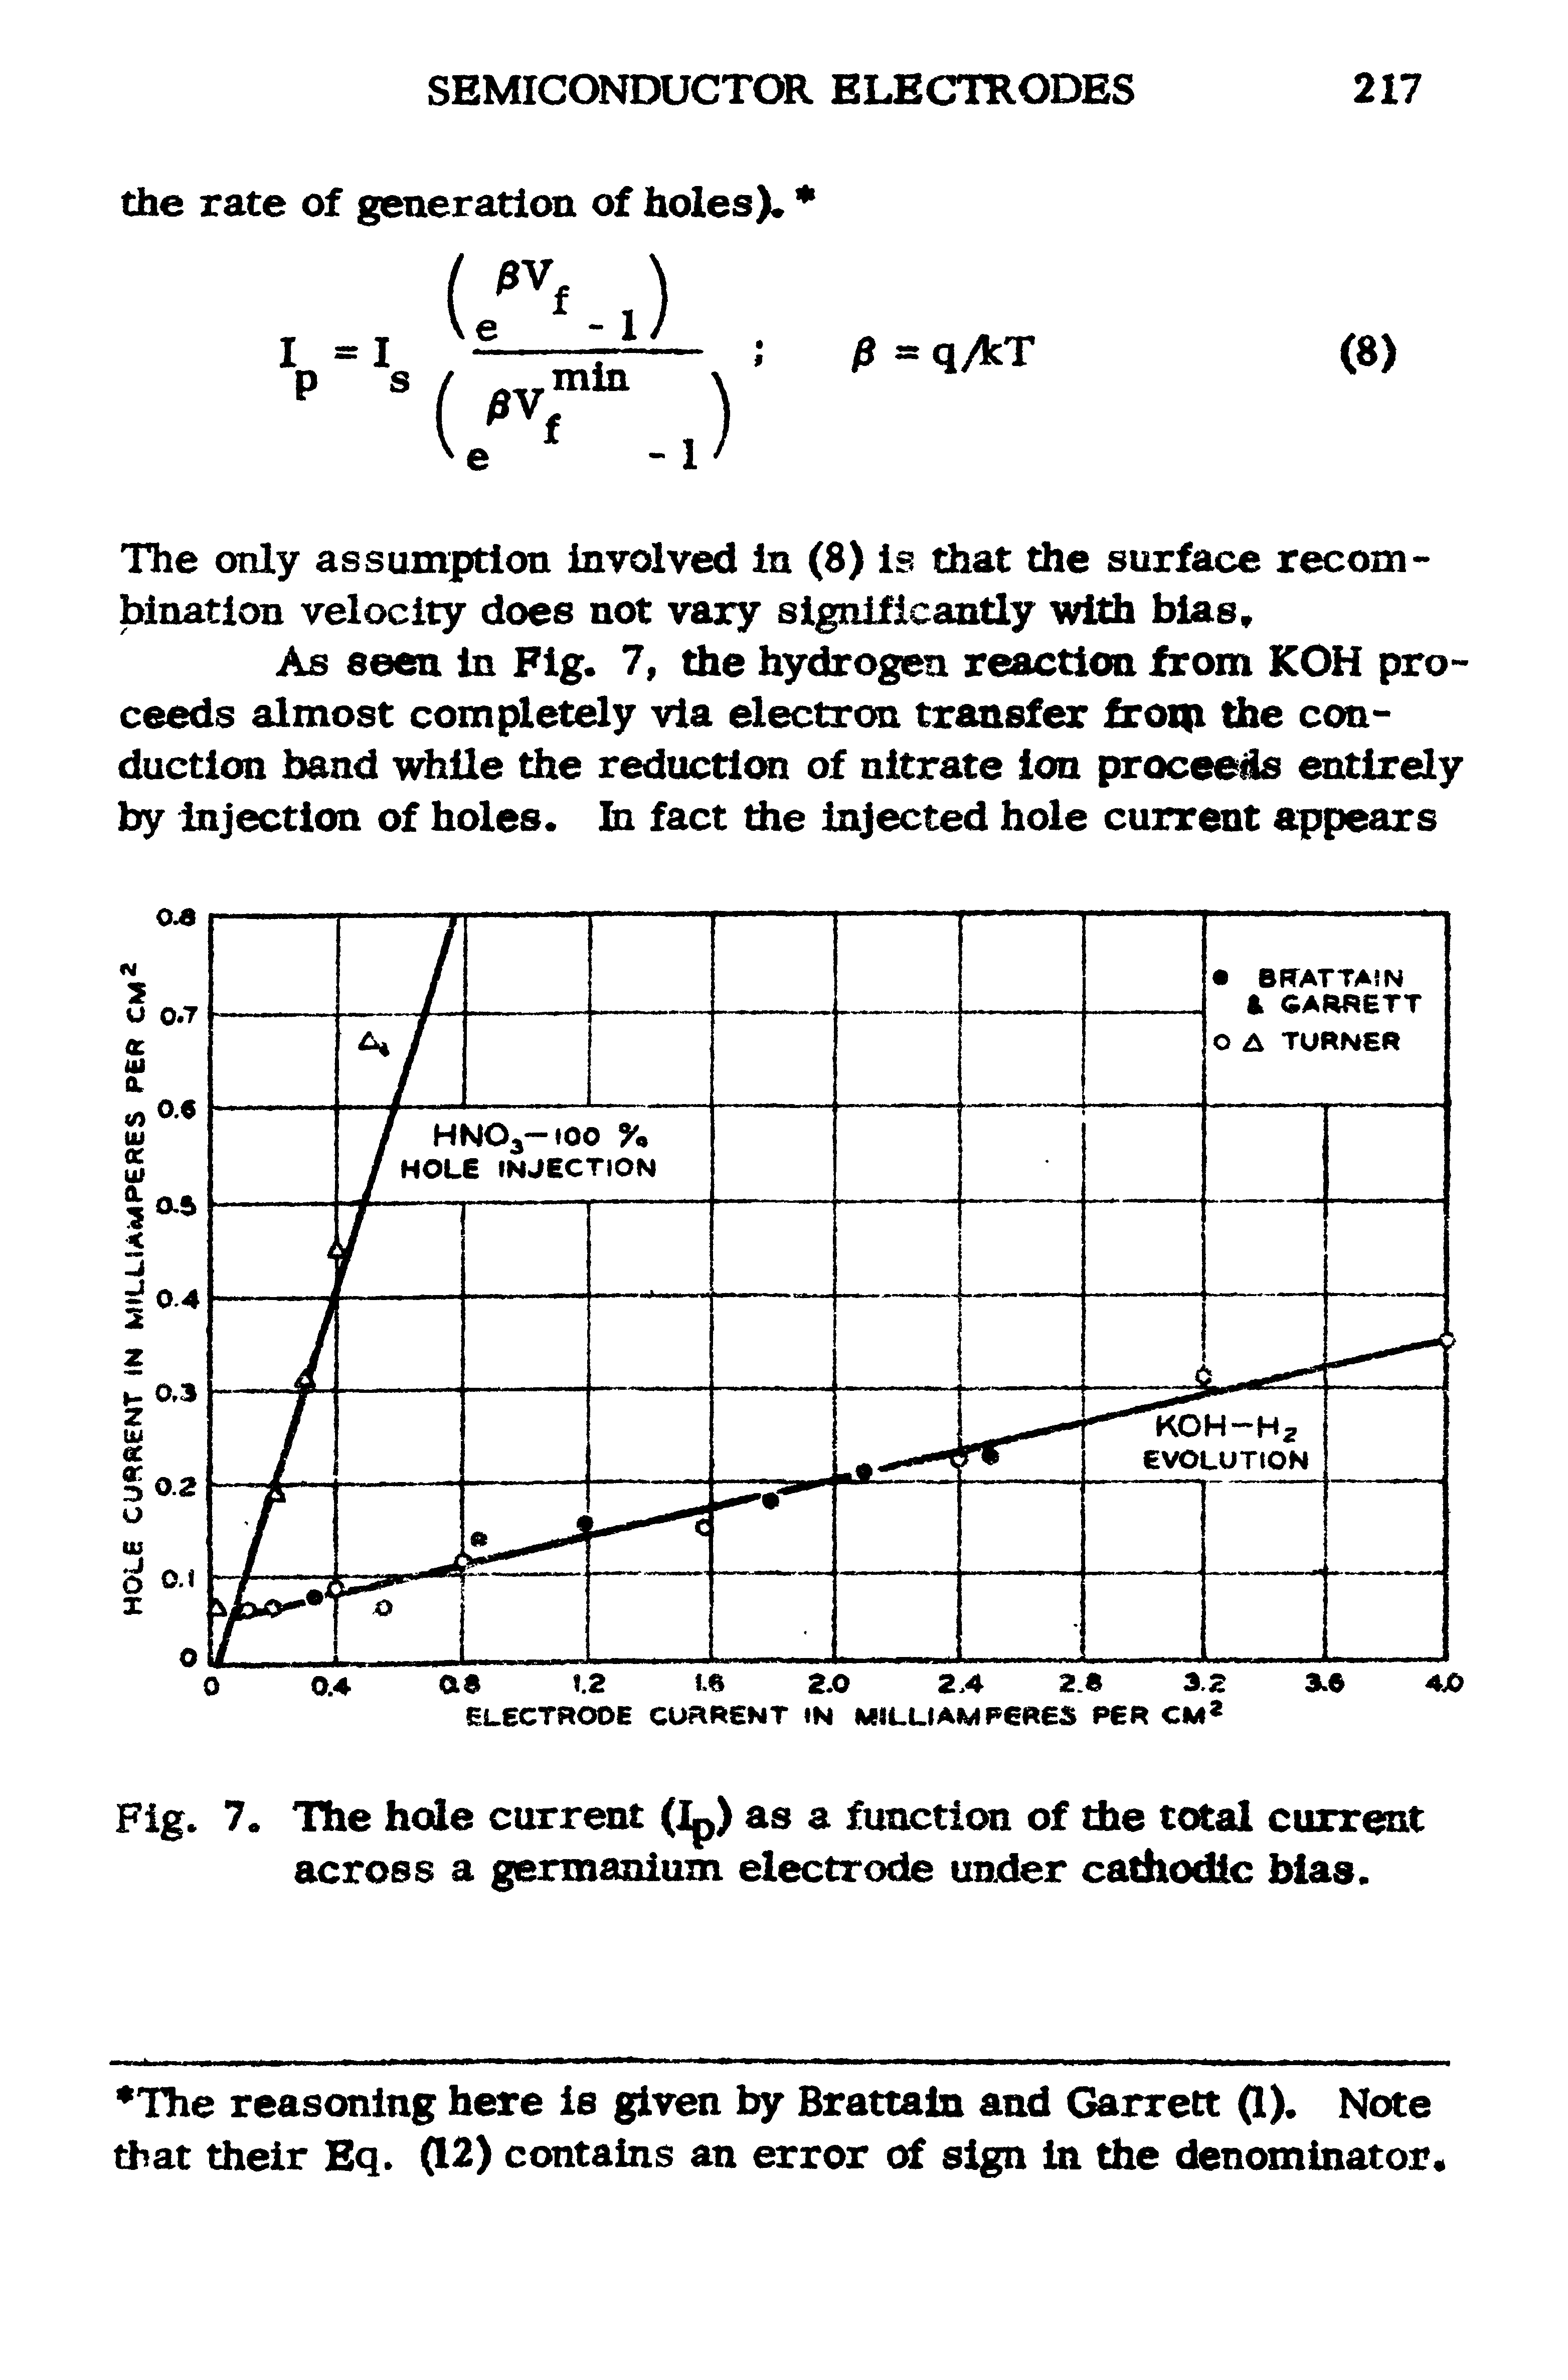 Fig. 7. The hole current (Ip) as a function of the total current across a germanium electrode under cathodic bias.